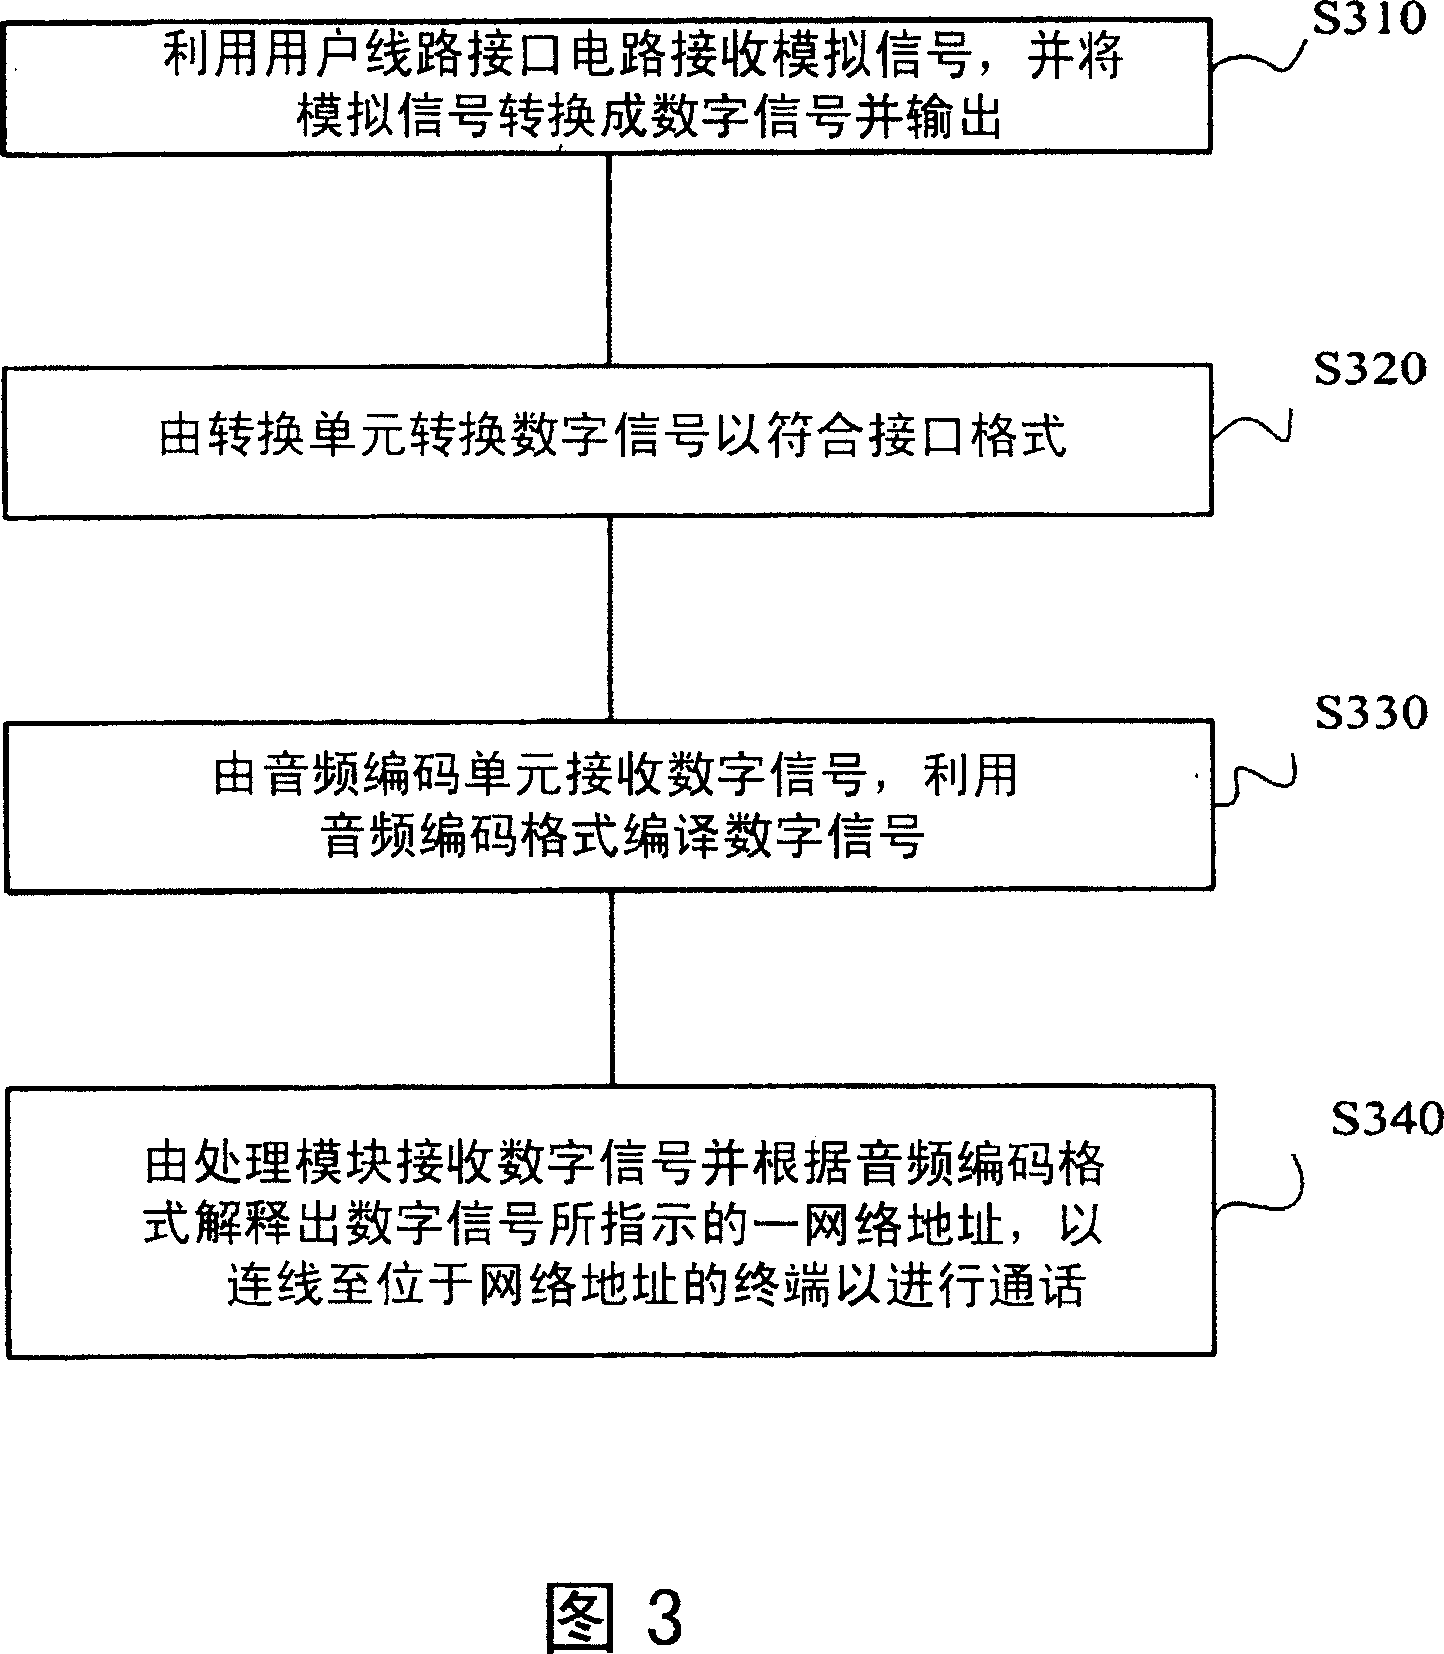 Network talking system and method